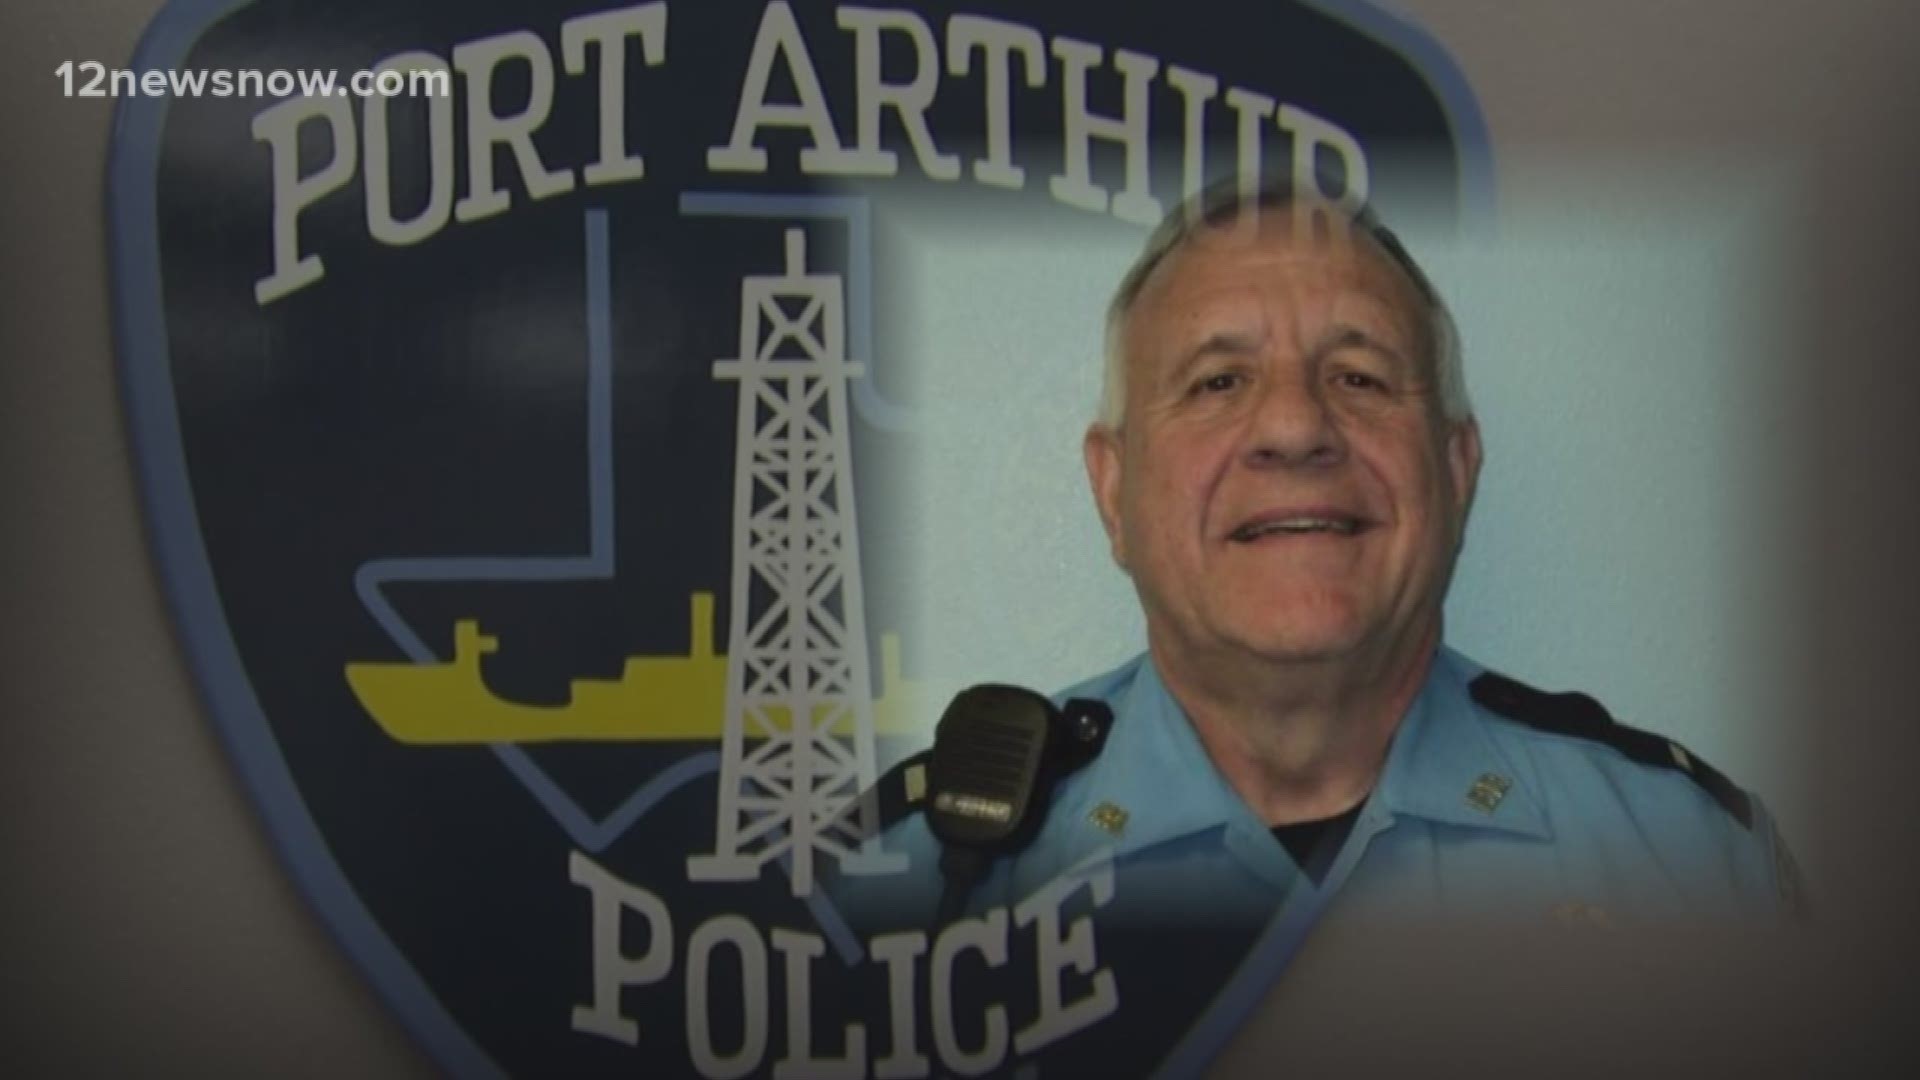 Council appoints Major Owens interim Port Arthur Police chief after Melvin's resignation